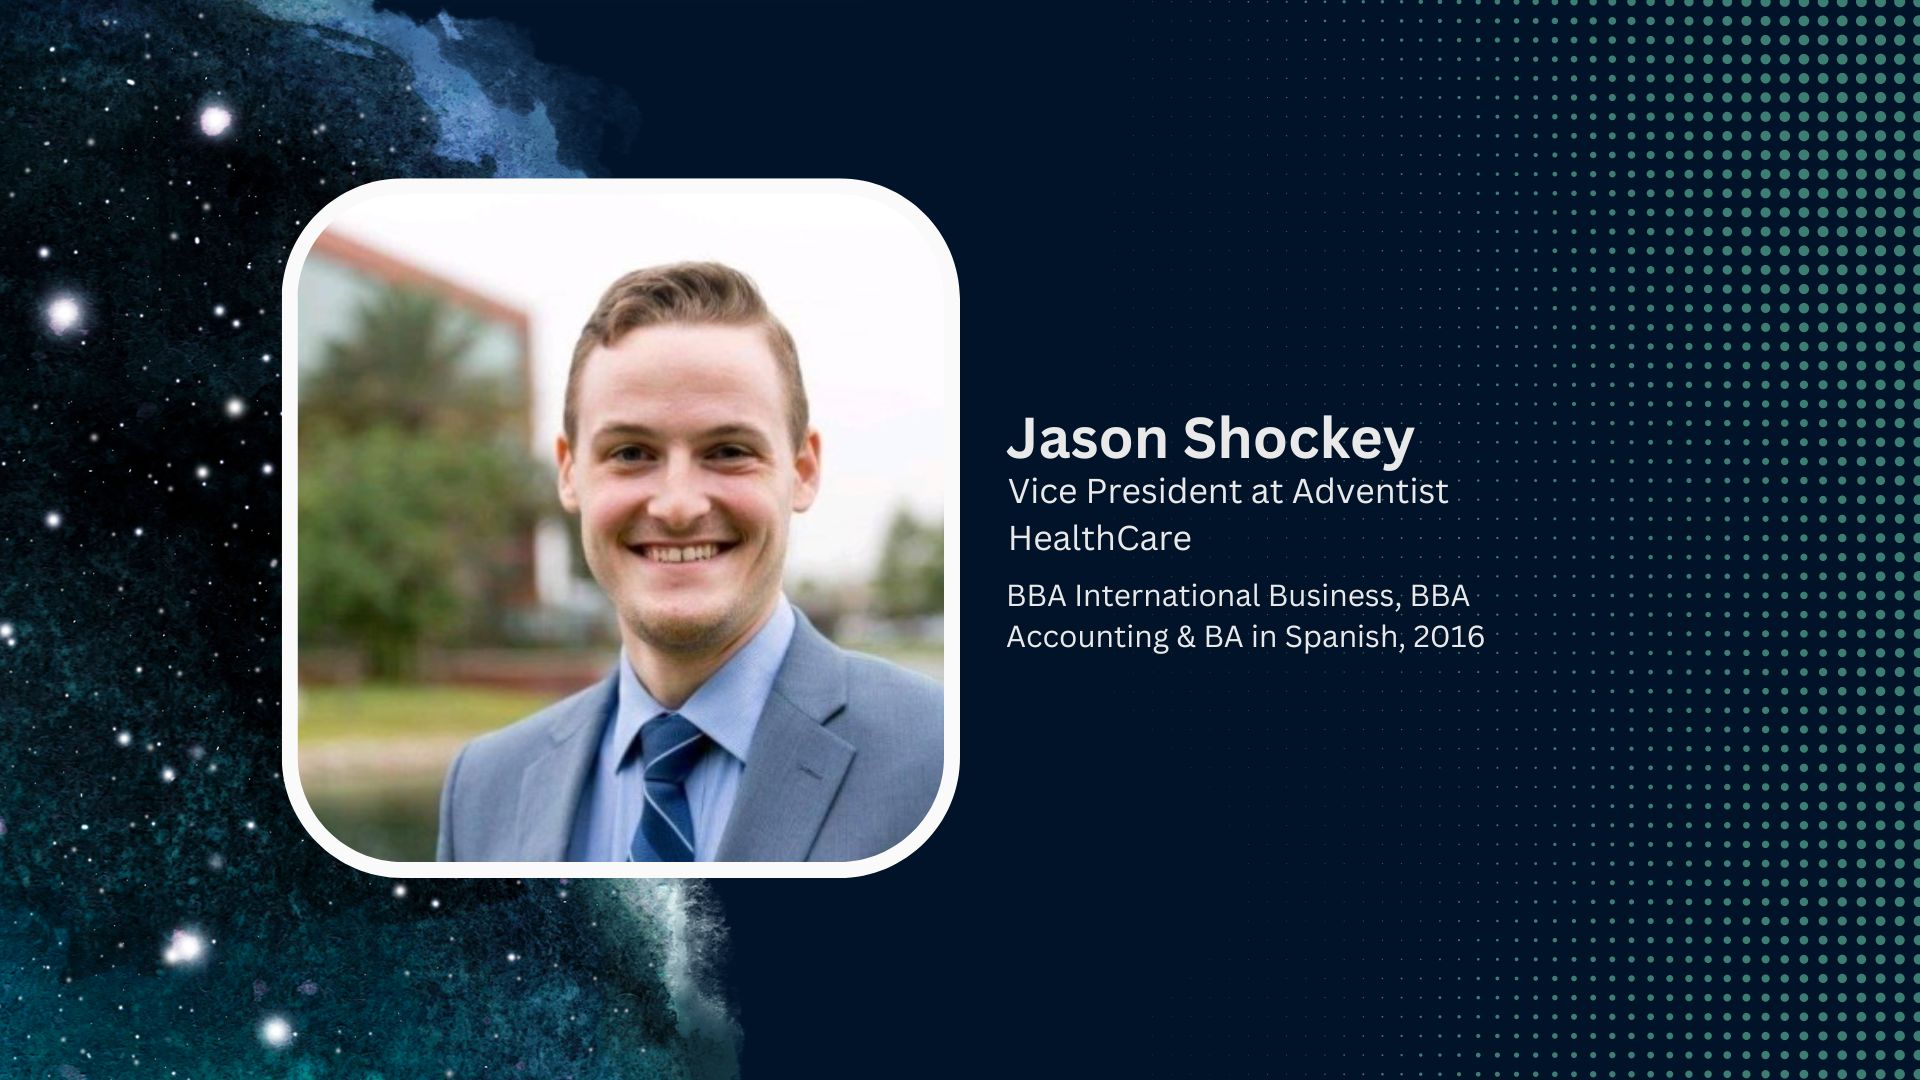 From Classroom to Healthcare Leadership: The Inspiring Journey of Jason Shockey